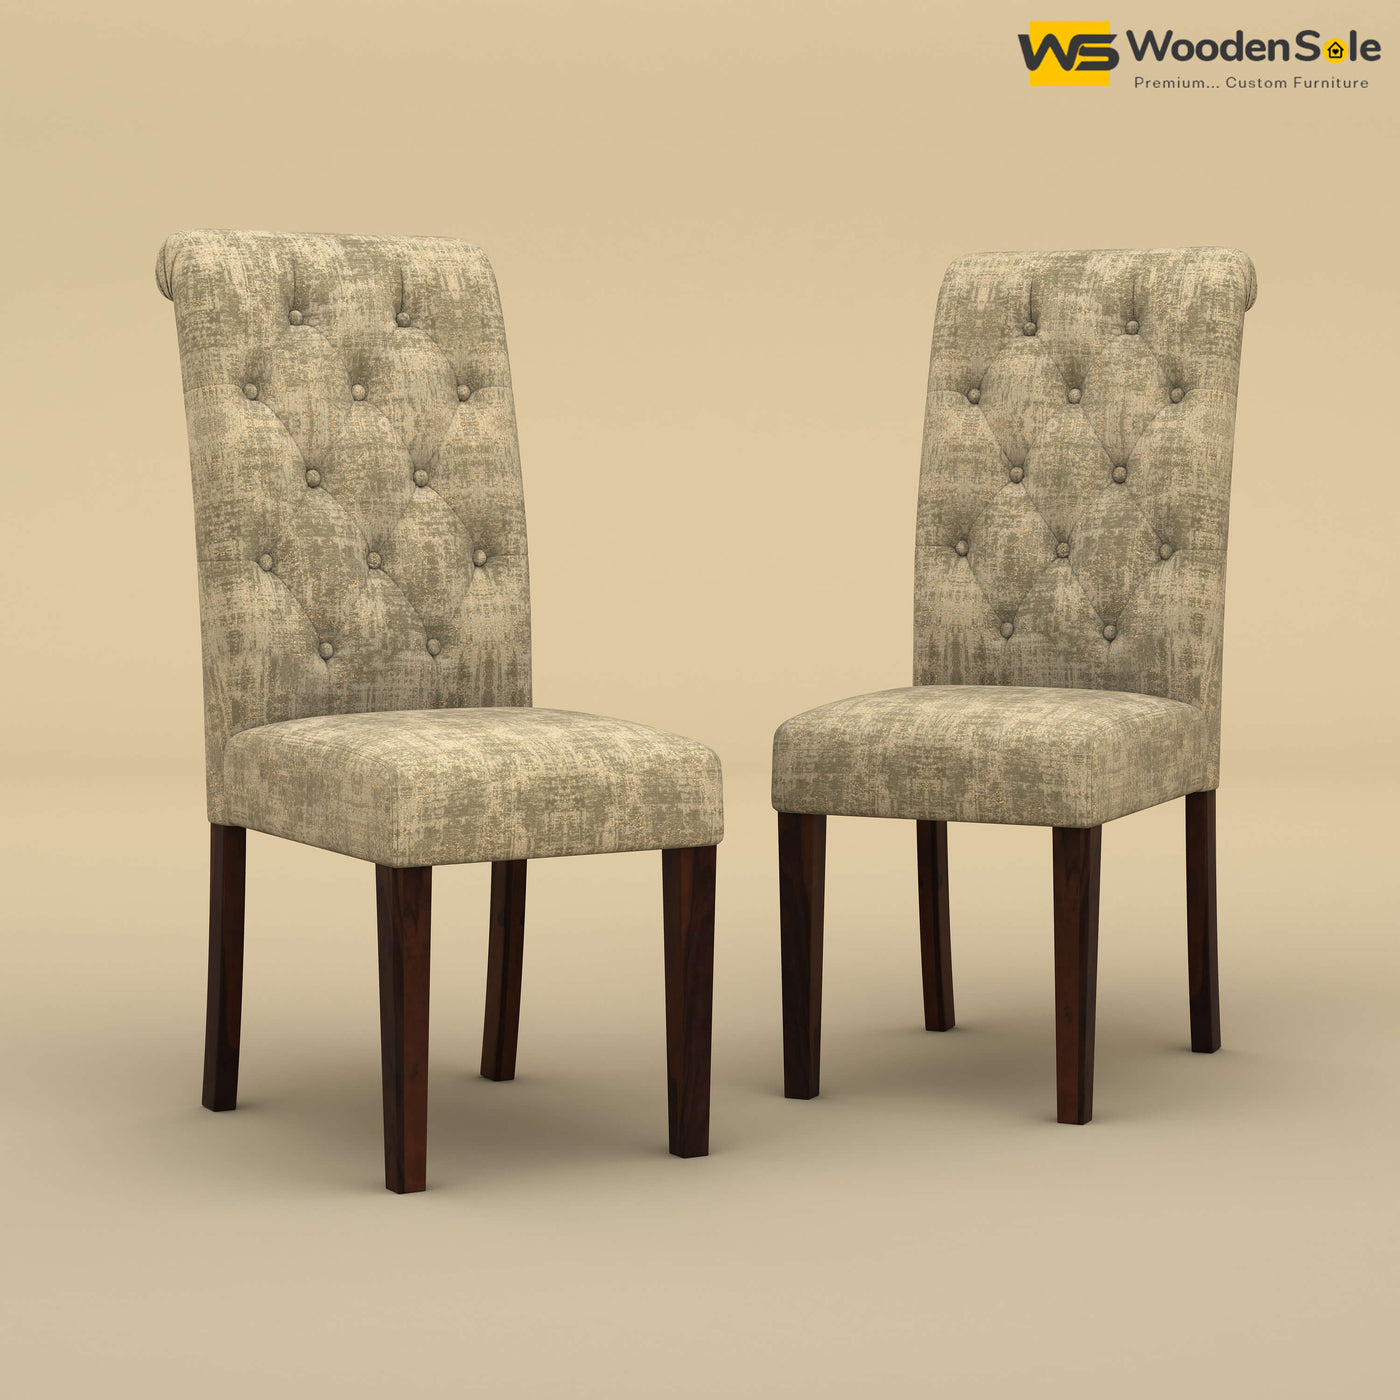 Elliot Dining Chairs - Set of 2 (Cotton, Patchy Cream)